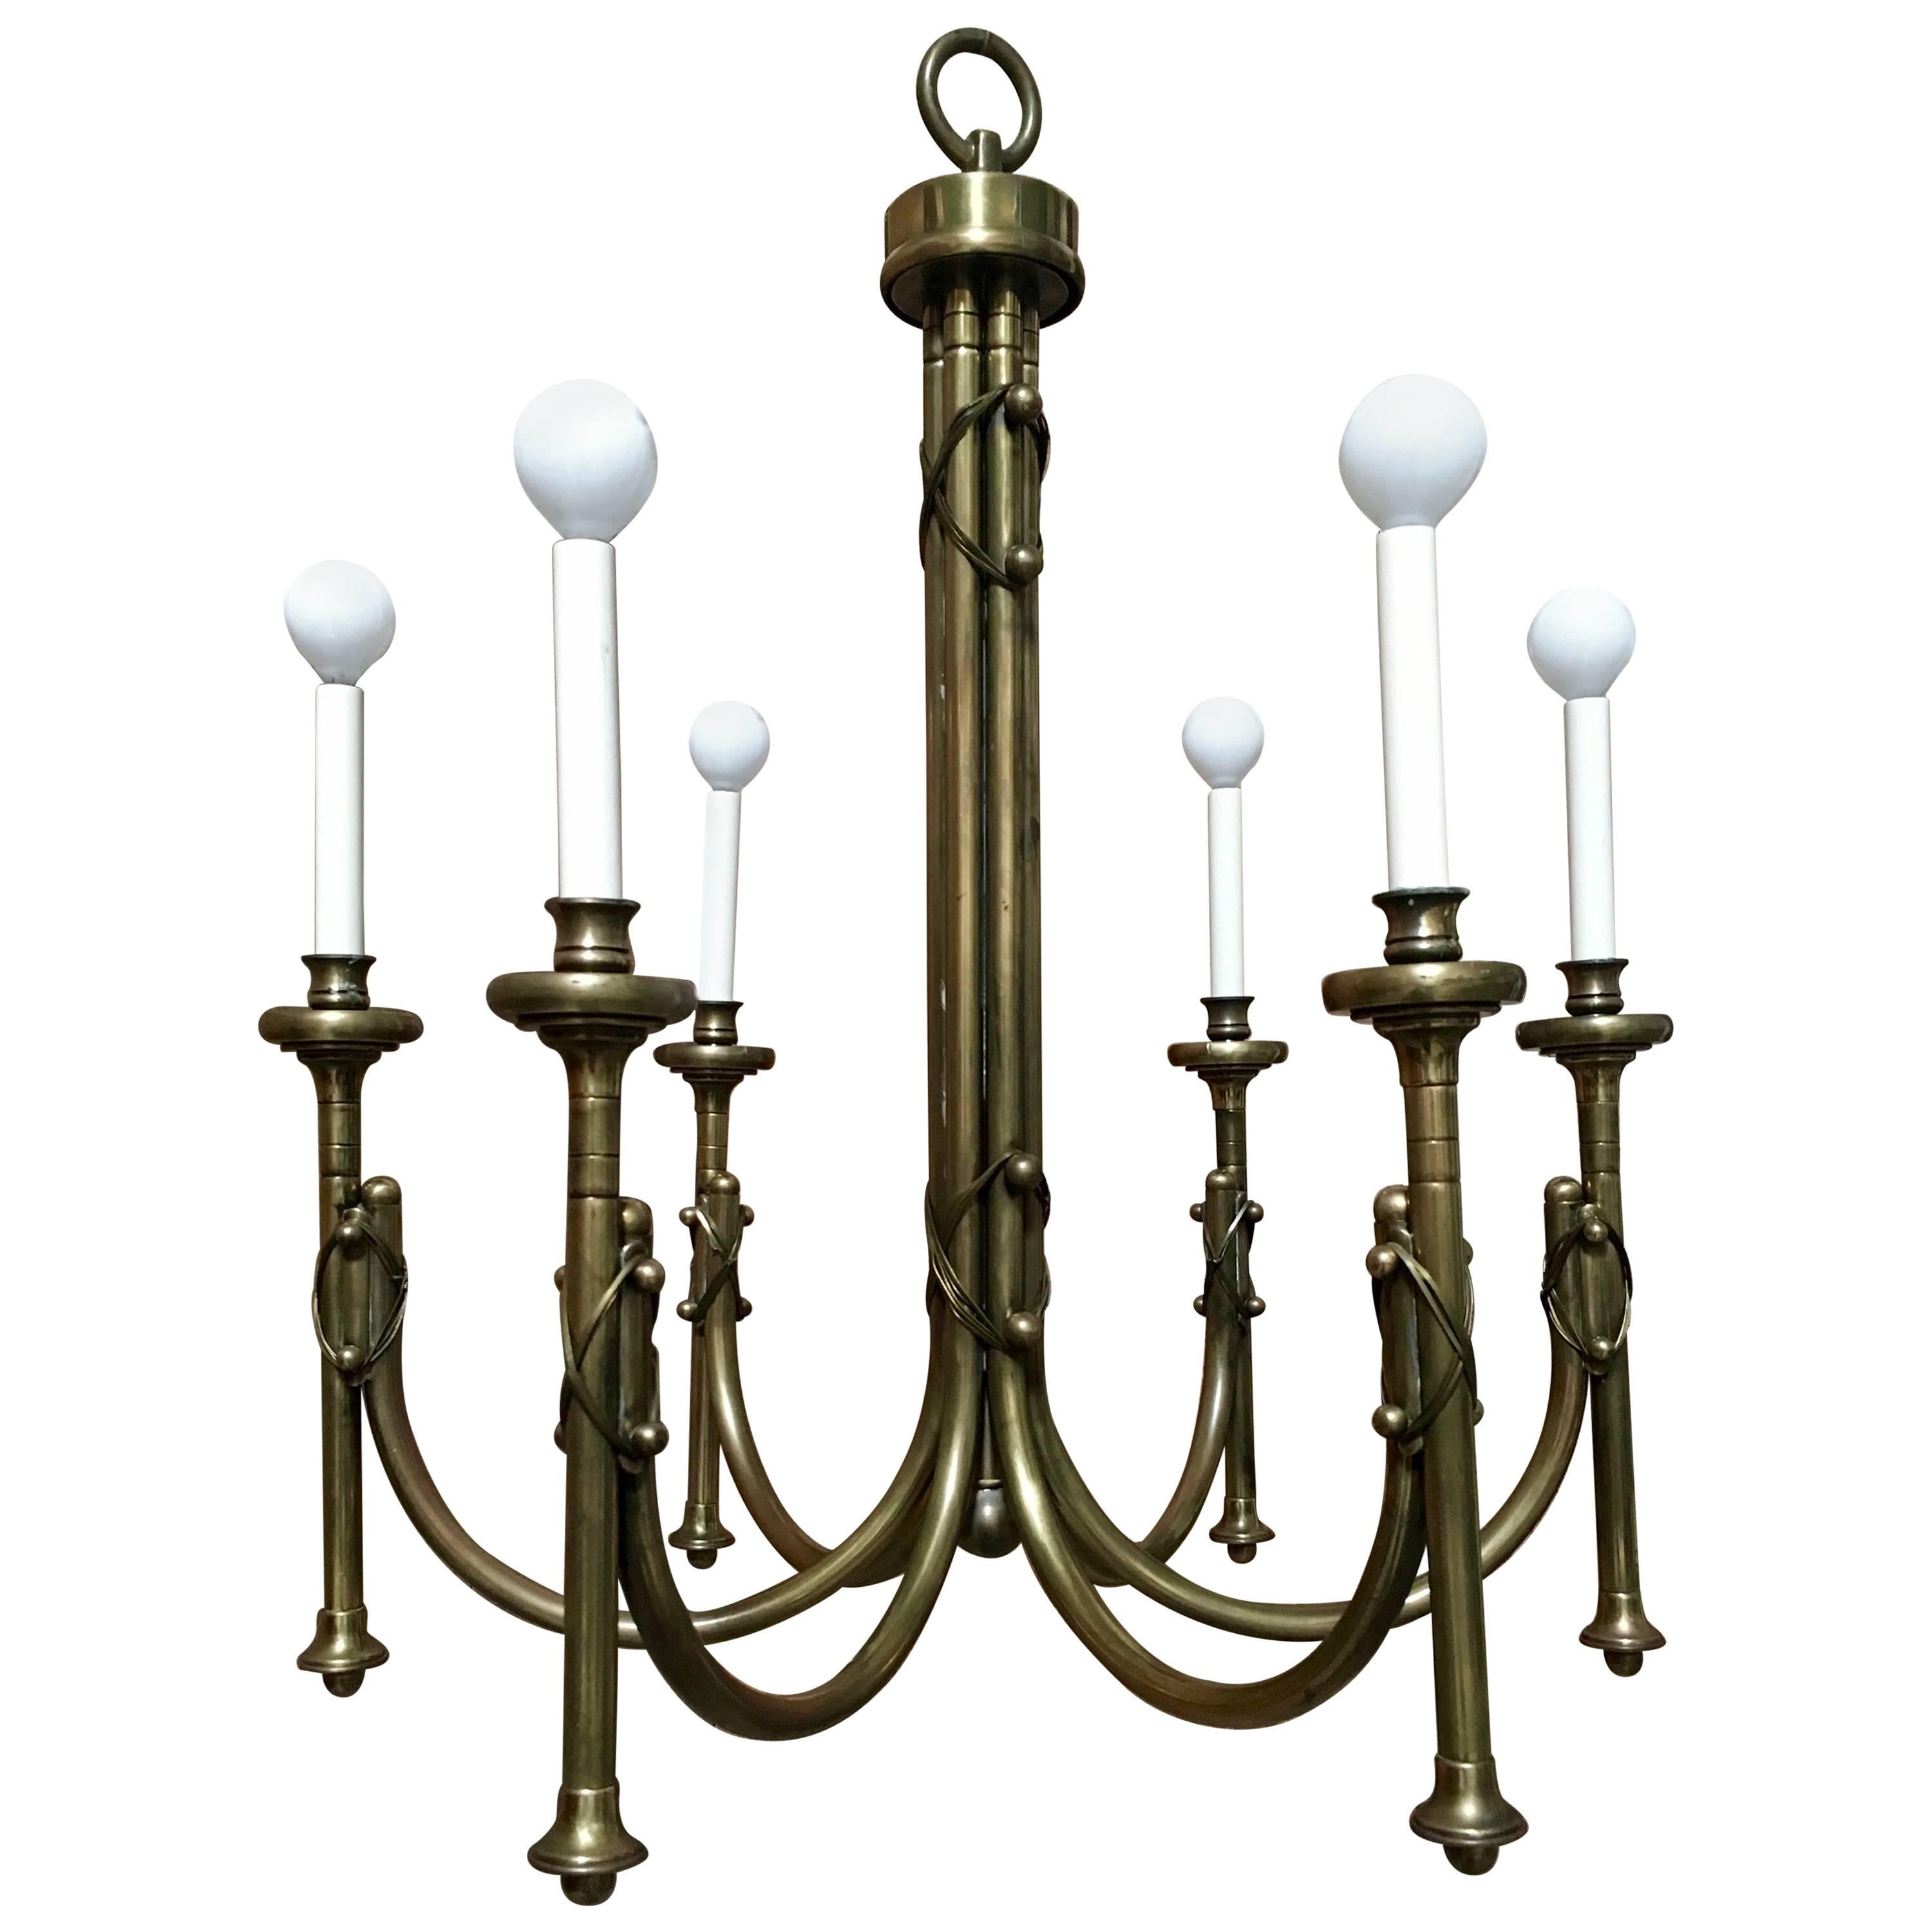 Large Scaled Neo Gothic Chandelier